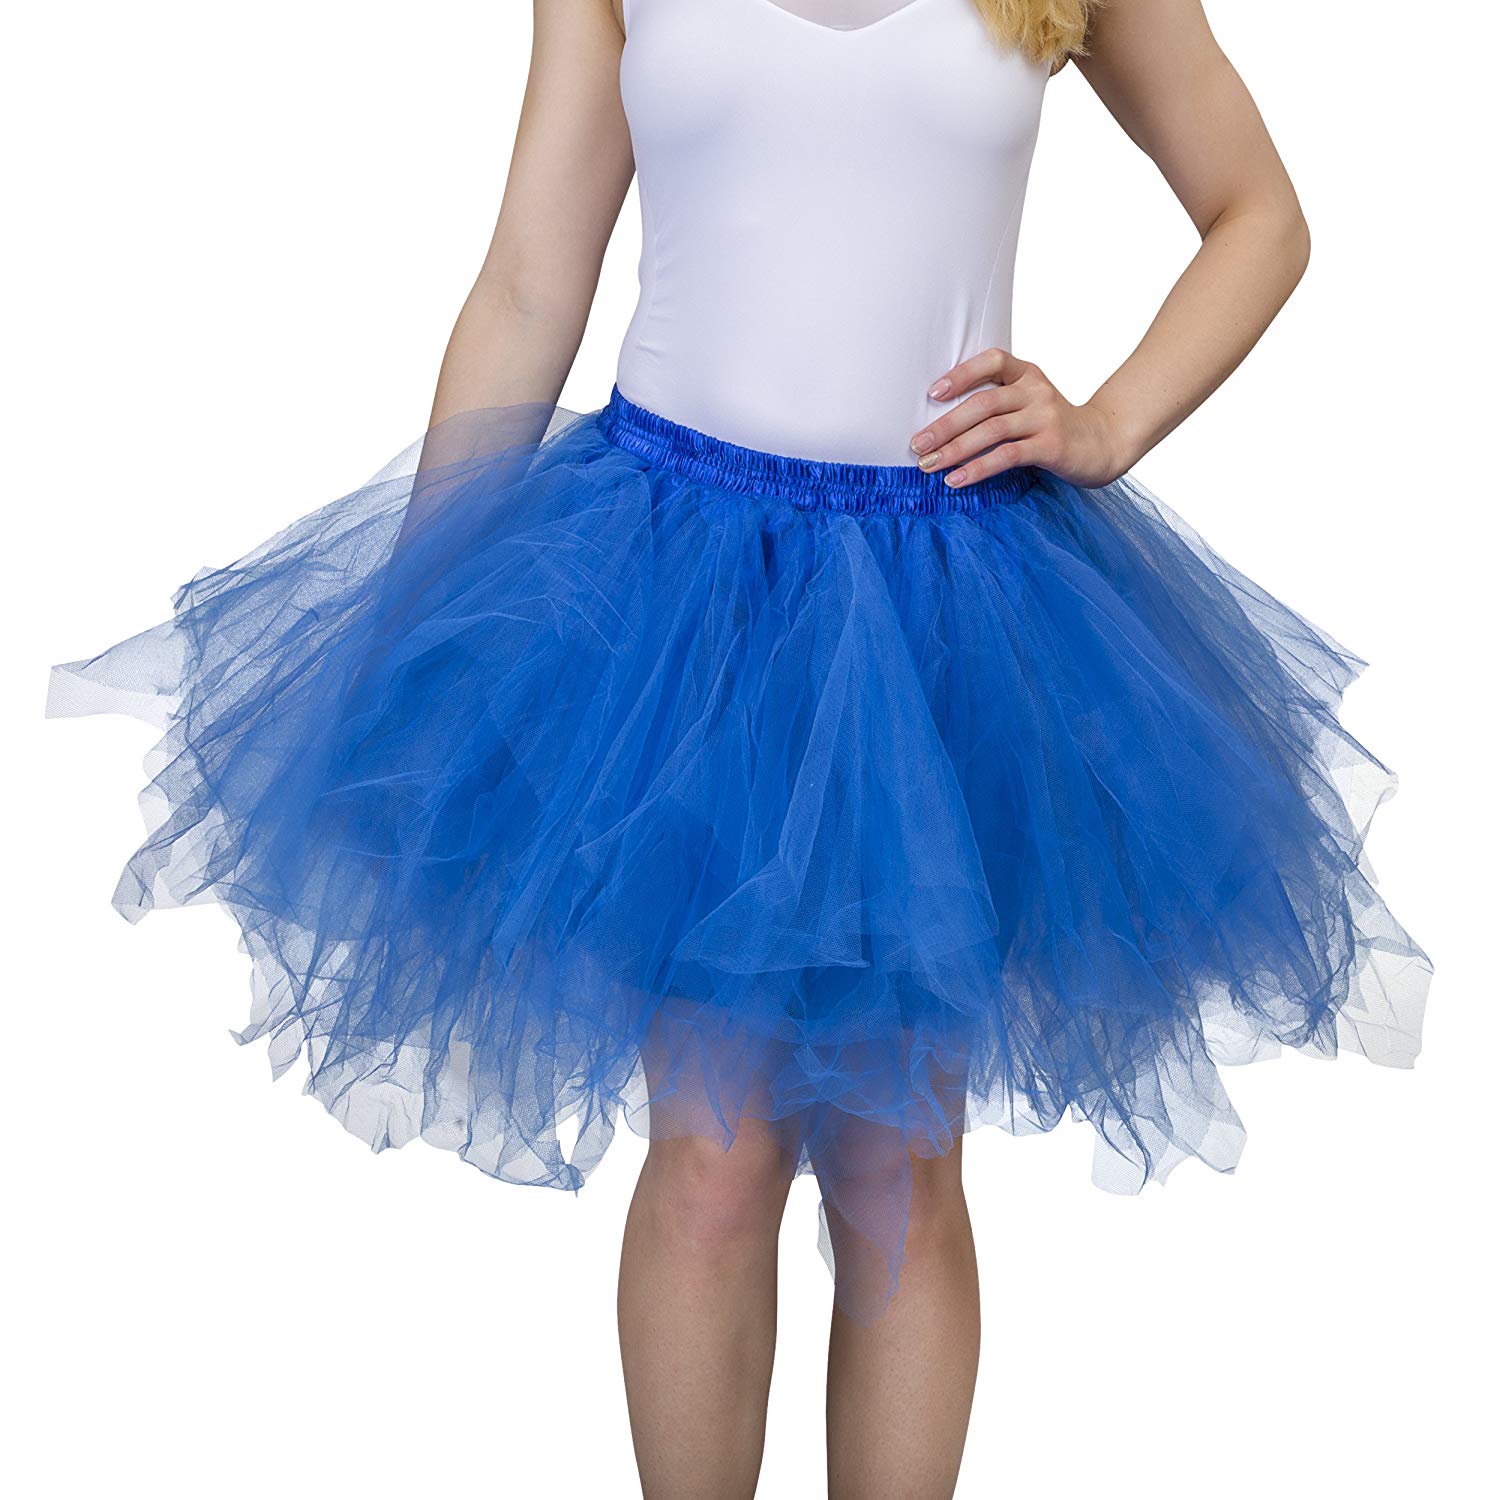 Blue Tutu Skirt for Adults Plus Size